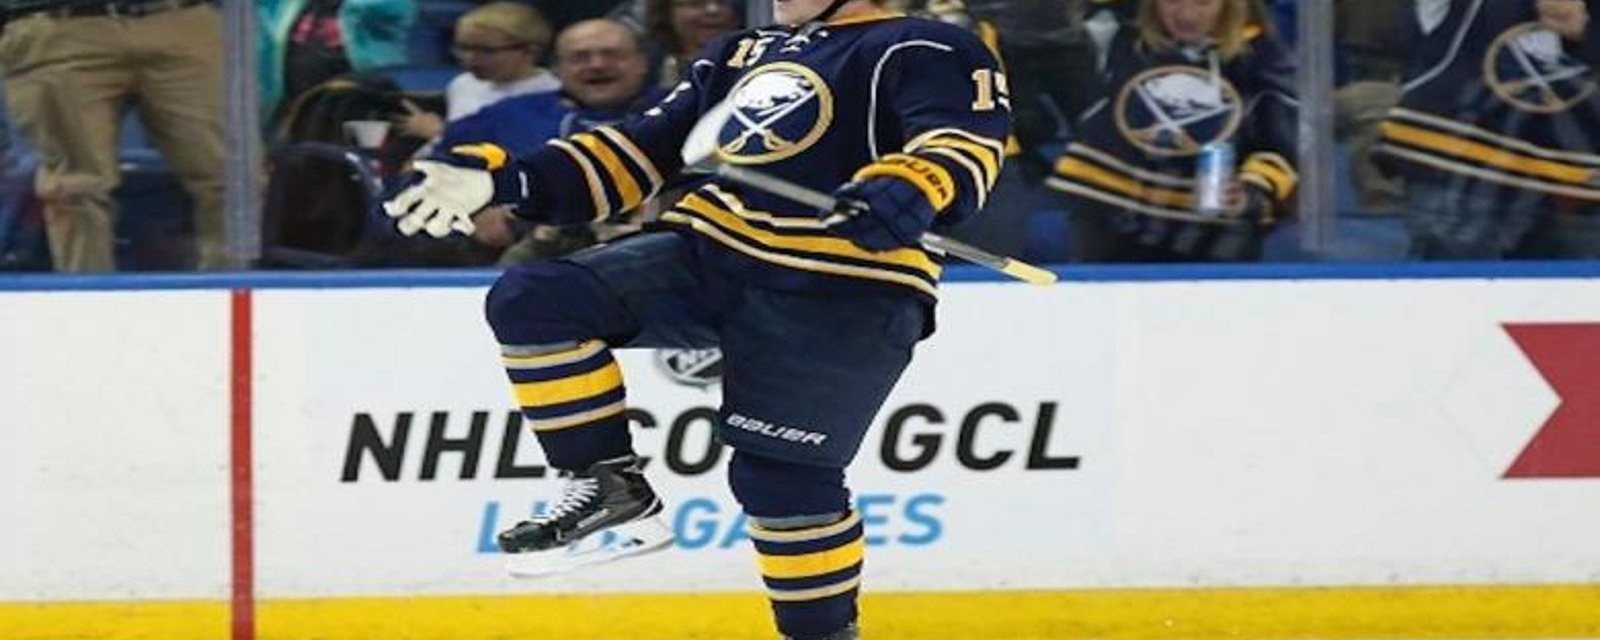 Must See: Jack Eichel scores two beauties.